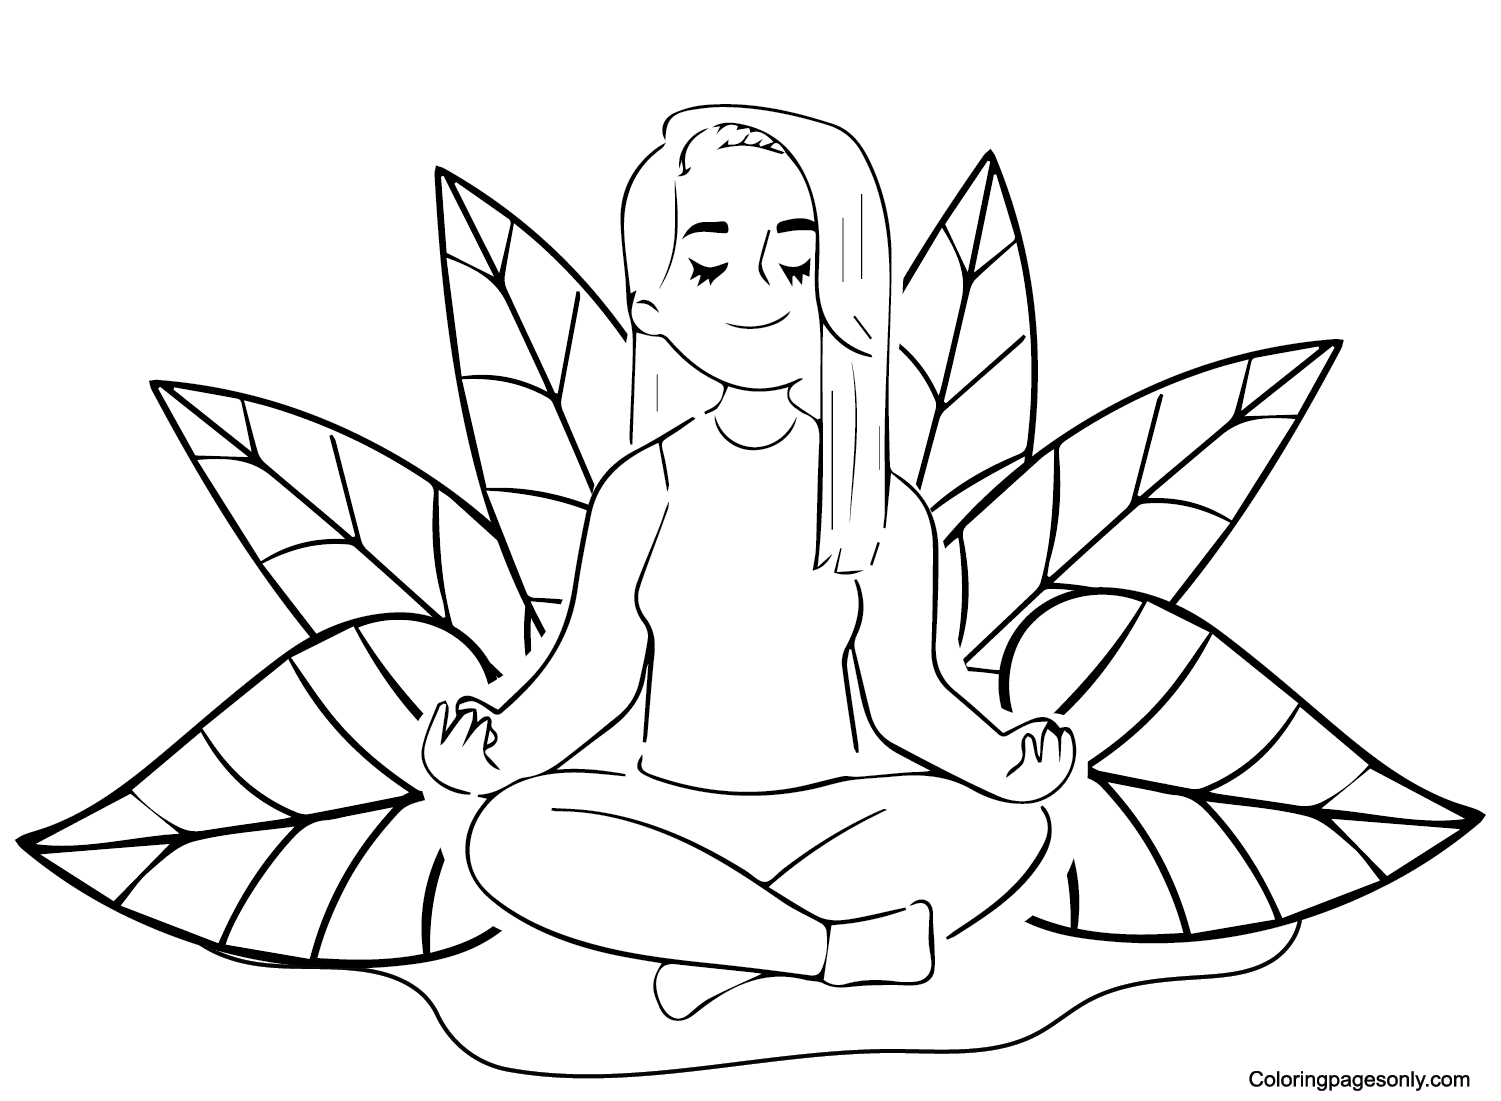 Print Mindfulness Coloring Page